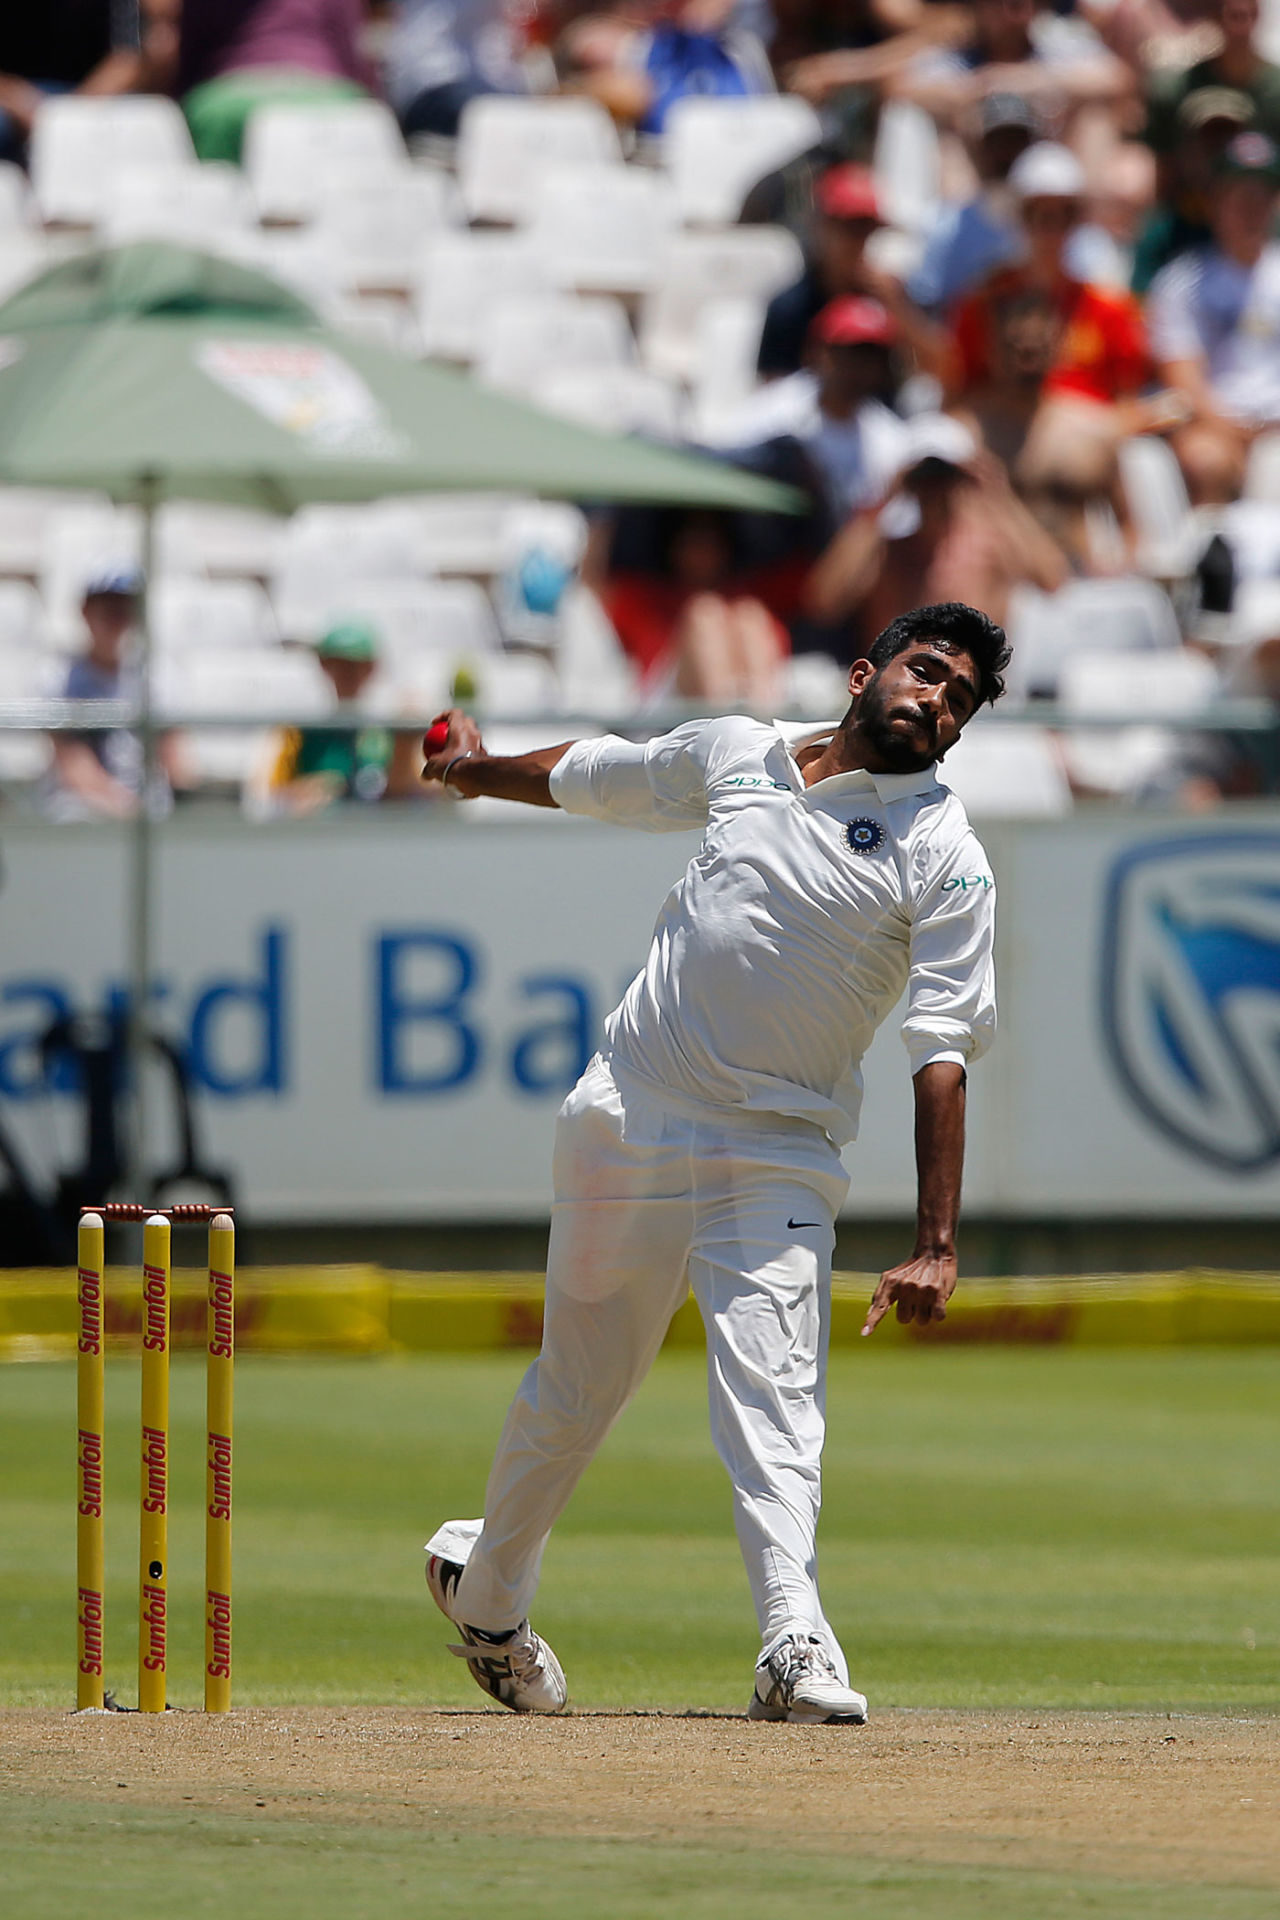 Jasprit Bumrah bowls on Test debut, South Africa v India, 1st Test, Cape Town, 1st day, January 5, 2017